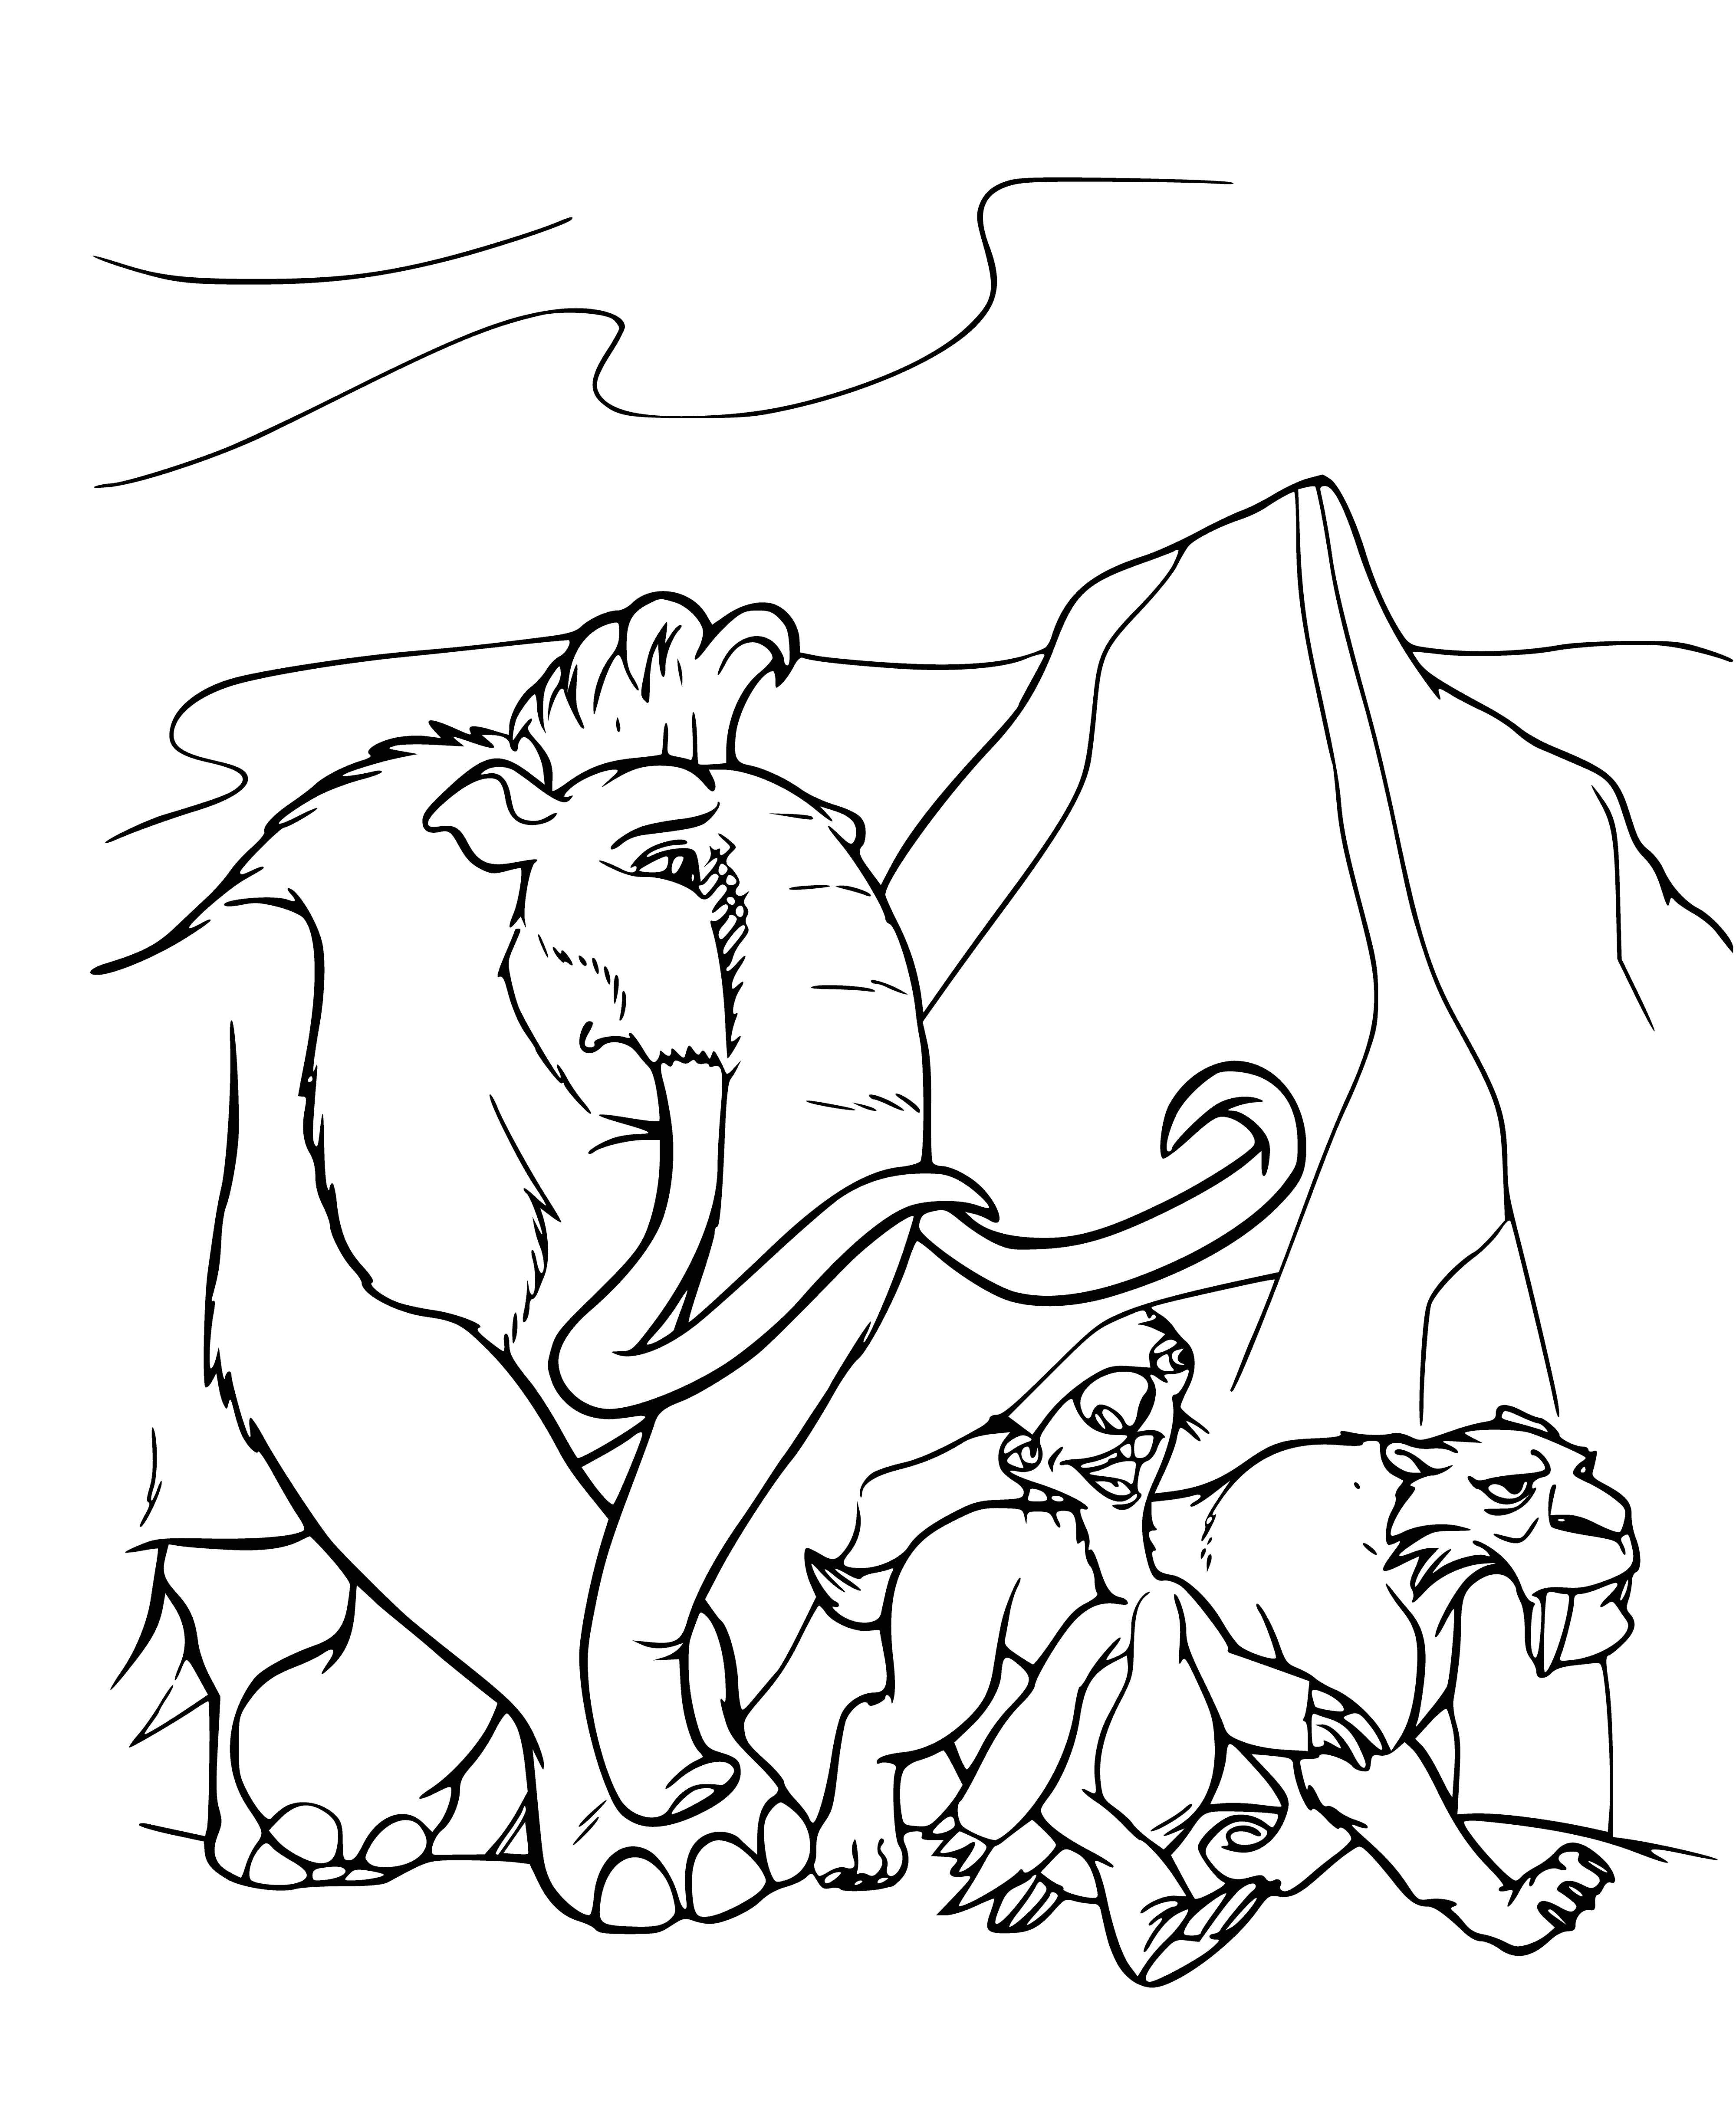 coloring page: Group of animals on mission to return lost human infant to its dad, journey thru danger & adventure to evade hunters. Team: mammoth, sloth, & tiger.